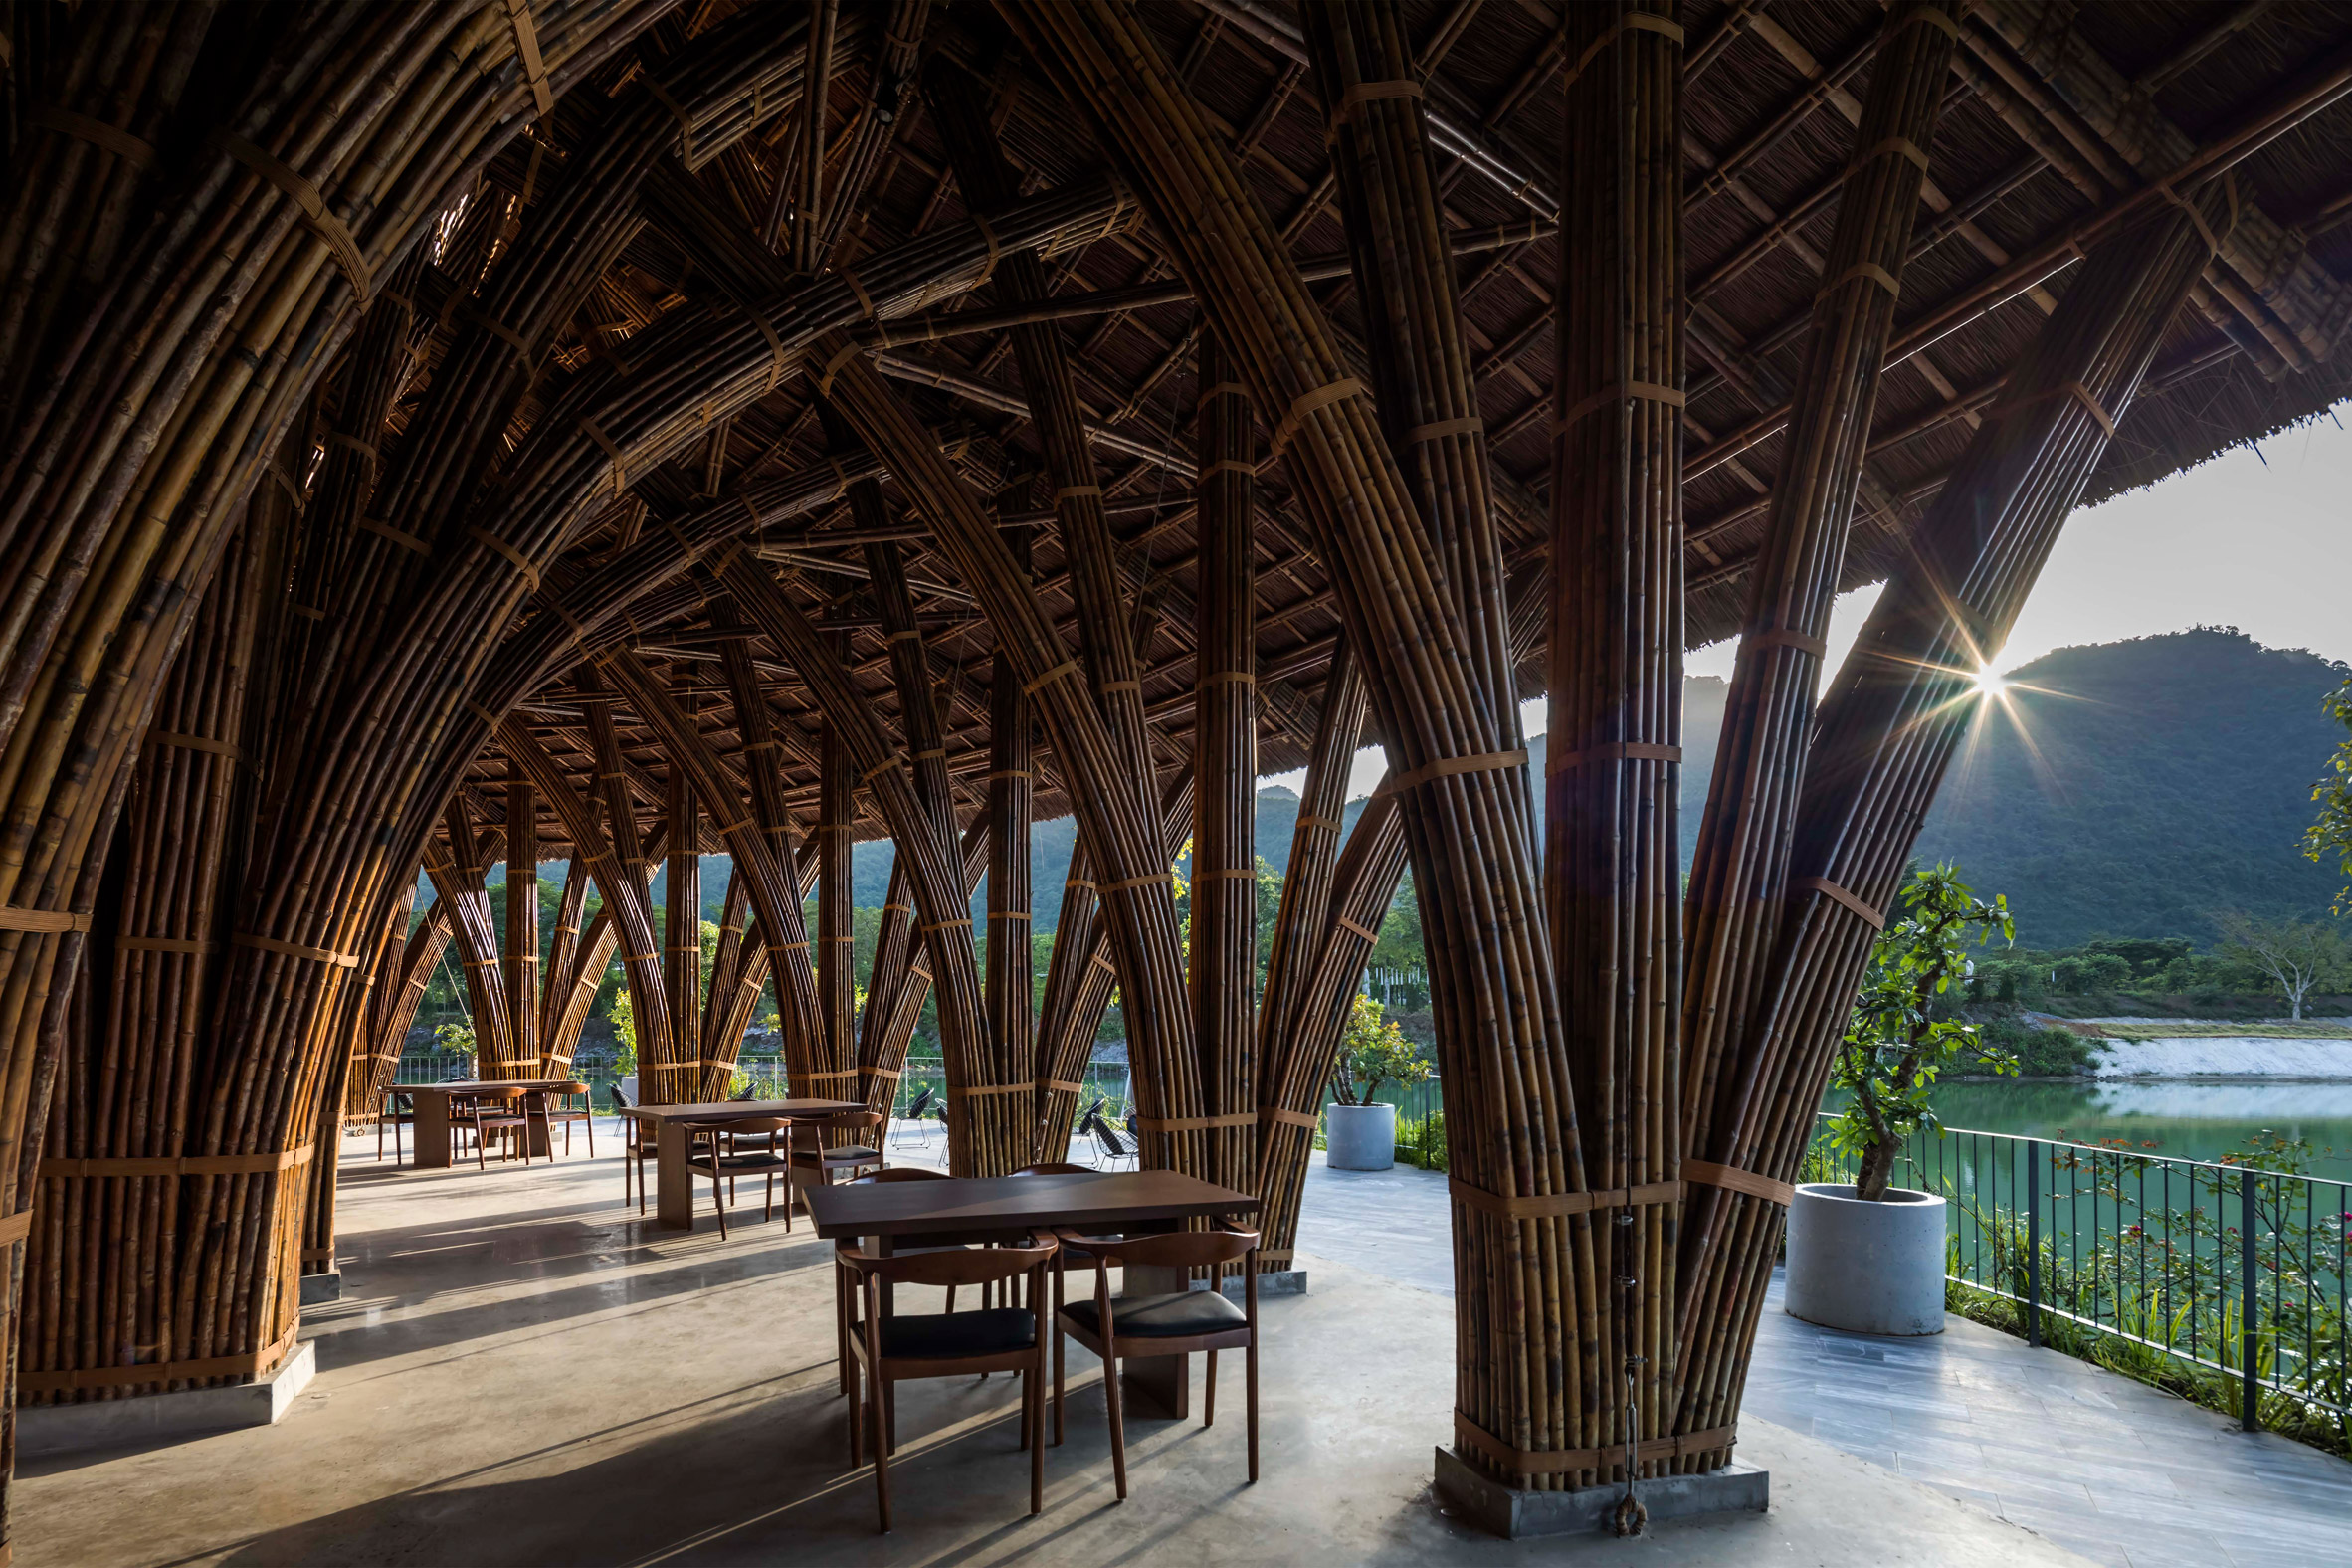 Interior of Vedana Restaurant by Vo Trong Nghia Architects